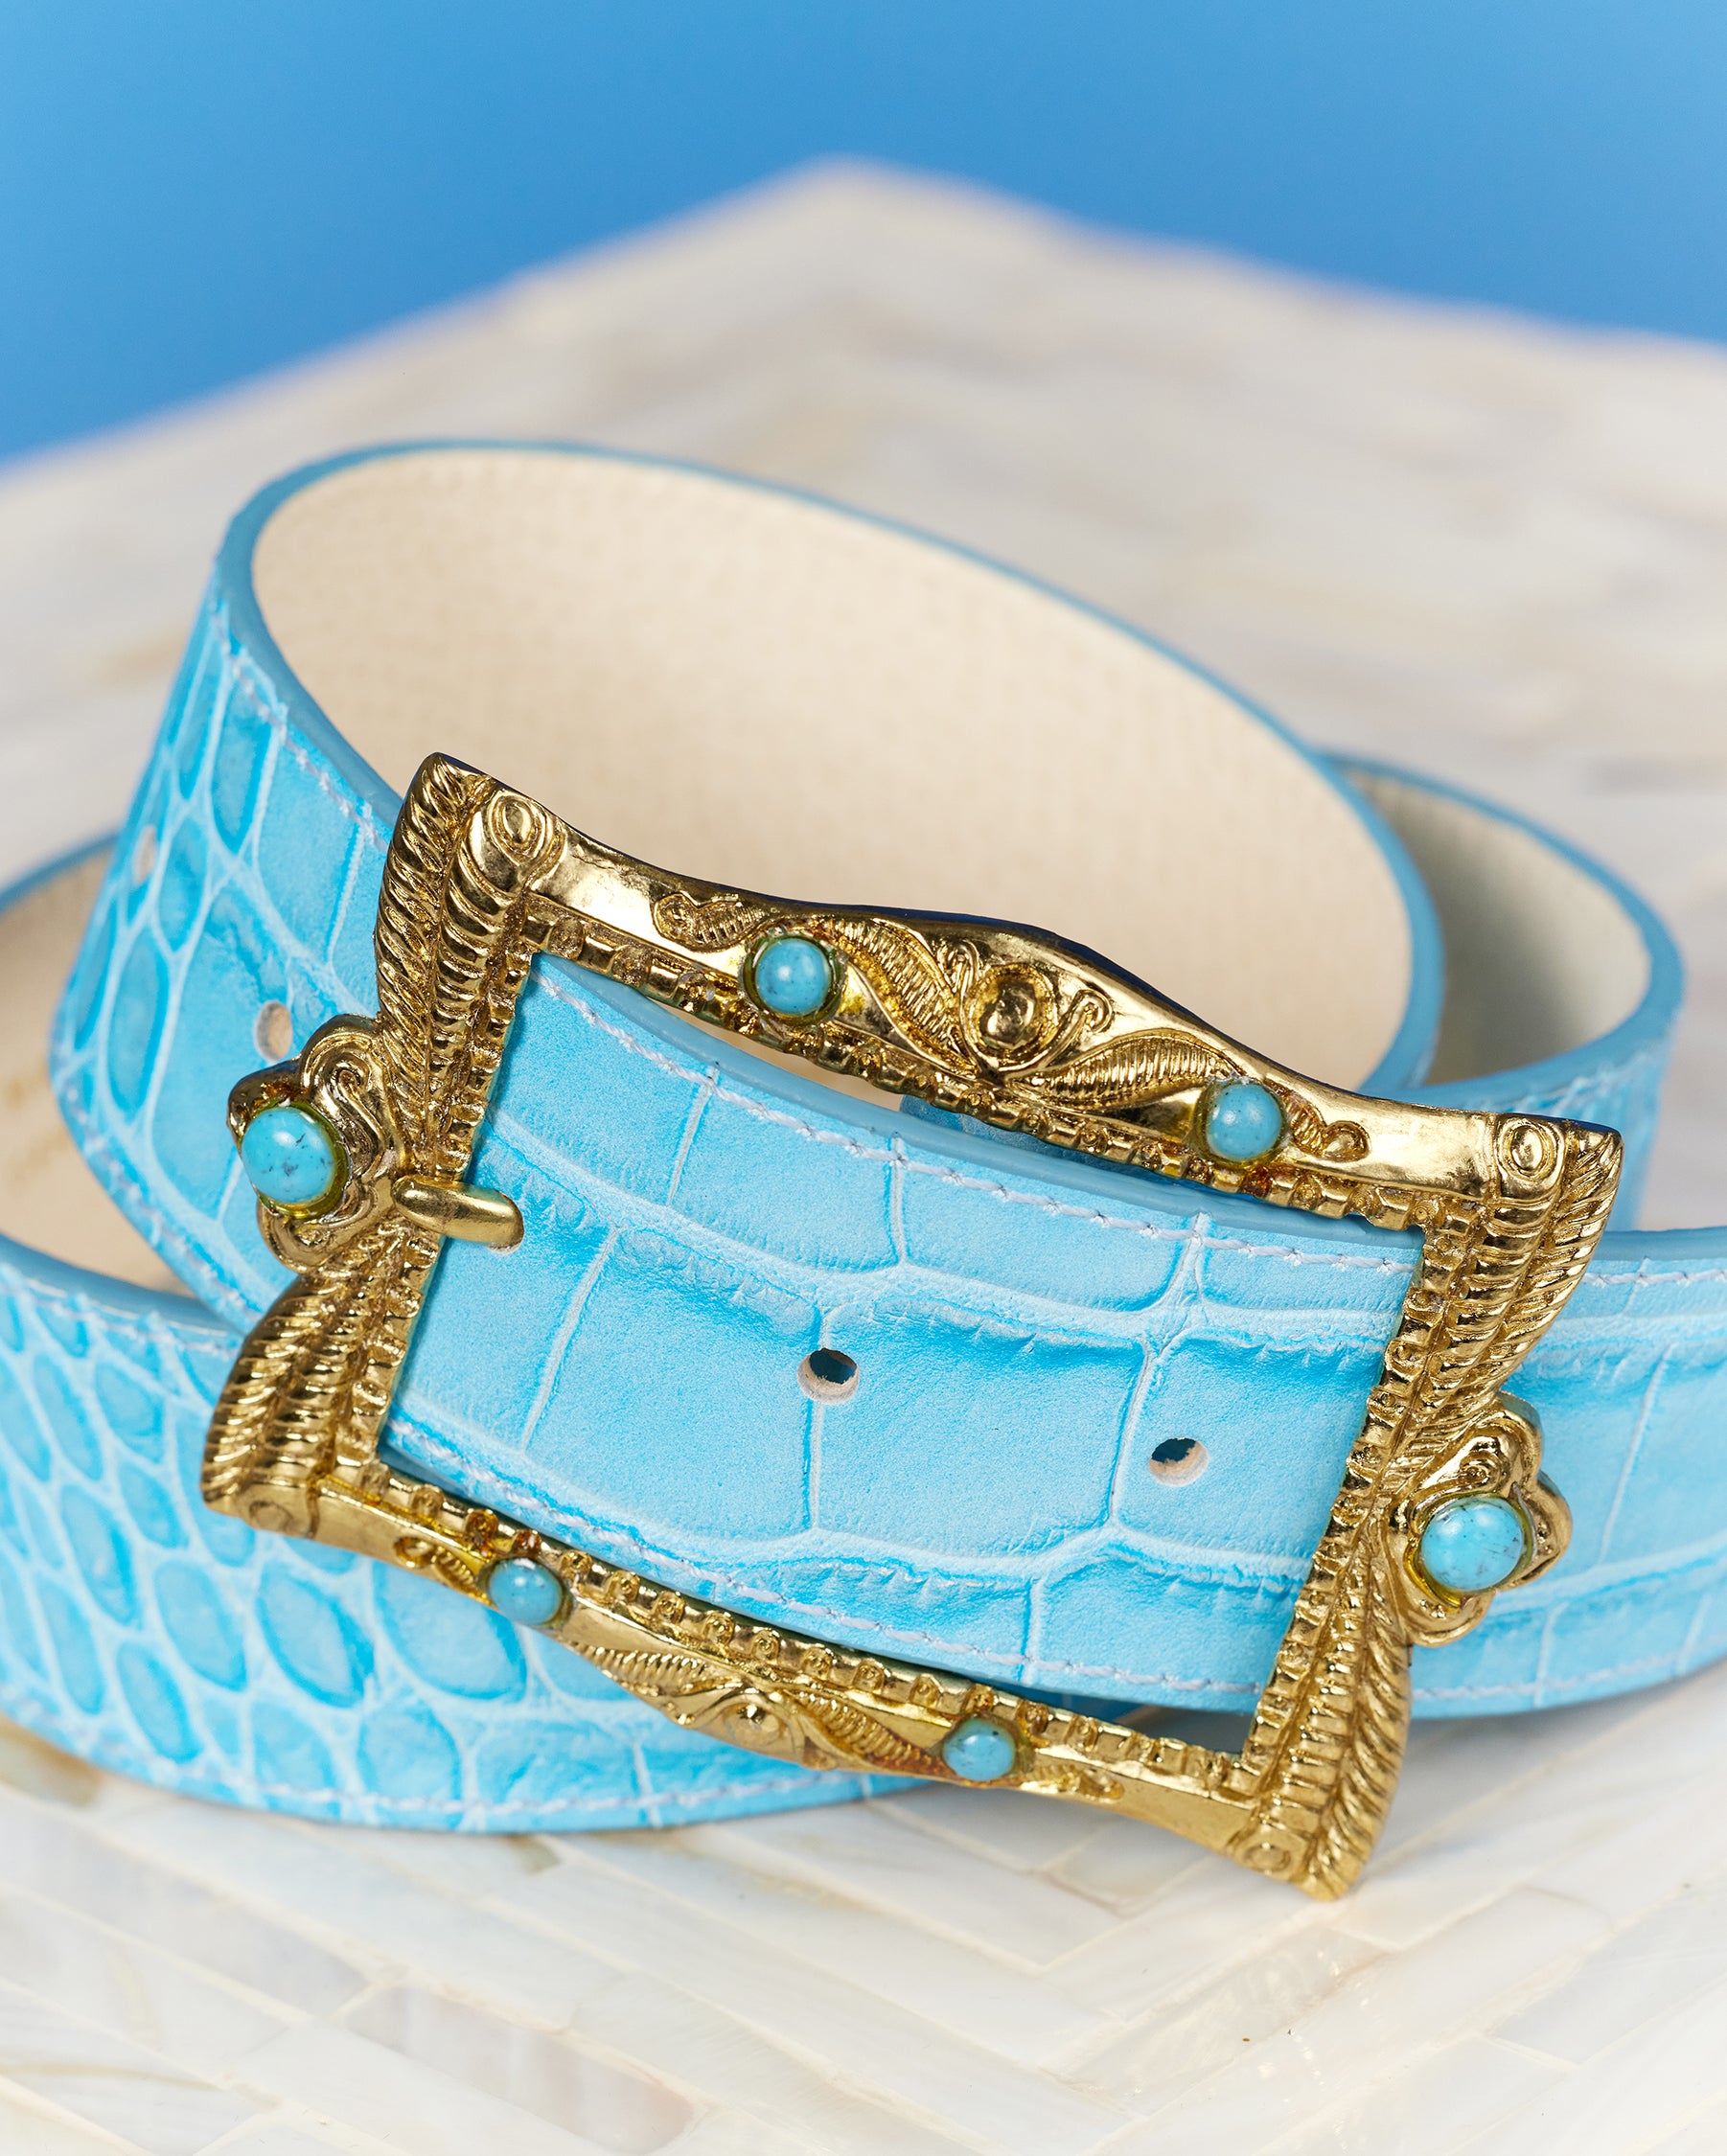 Blair Leather Belt in Croc-Embossed Turquoise-closeup of the belt buckle